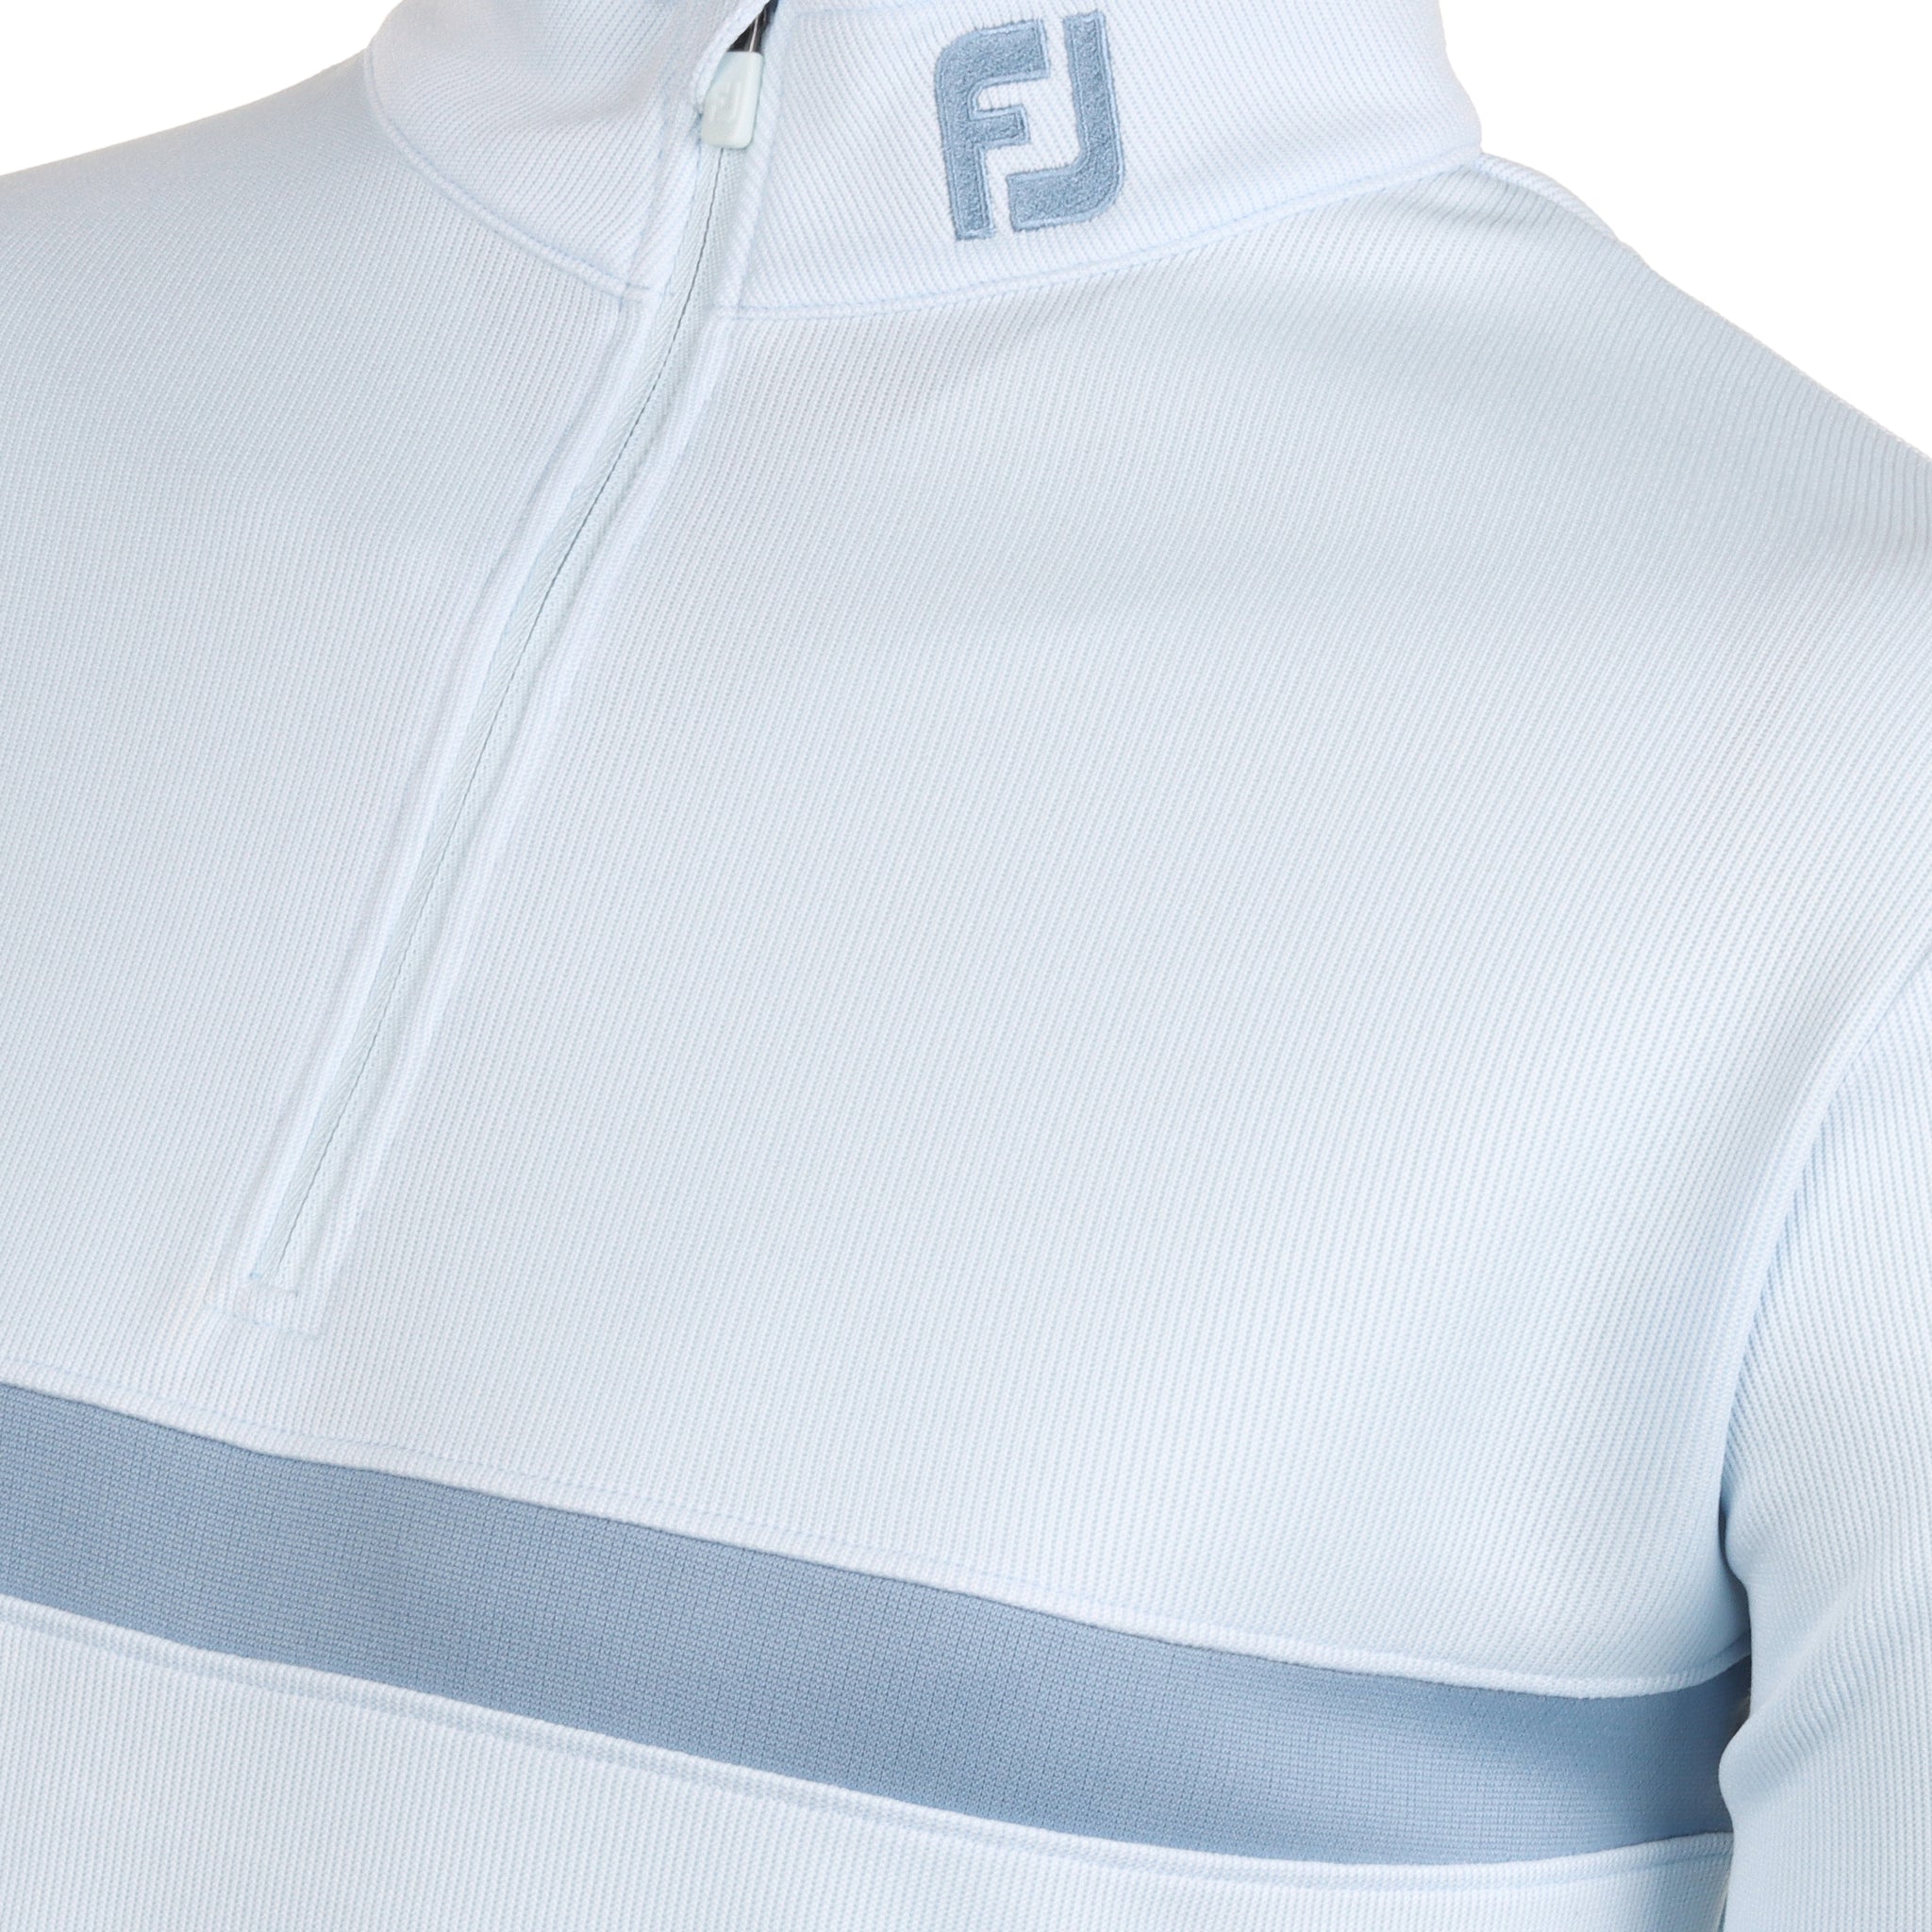 footjoy-inset-stripe-chill-out-pullover-81632-mist-storm